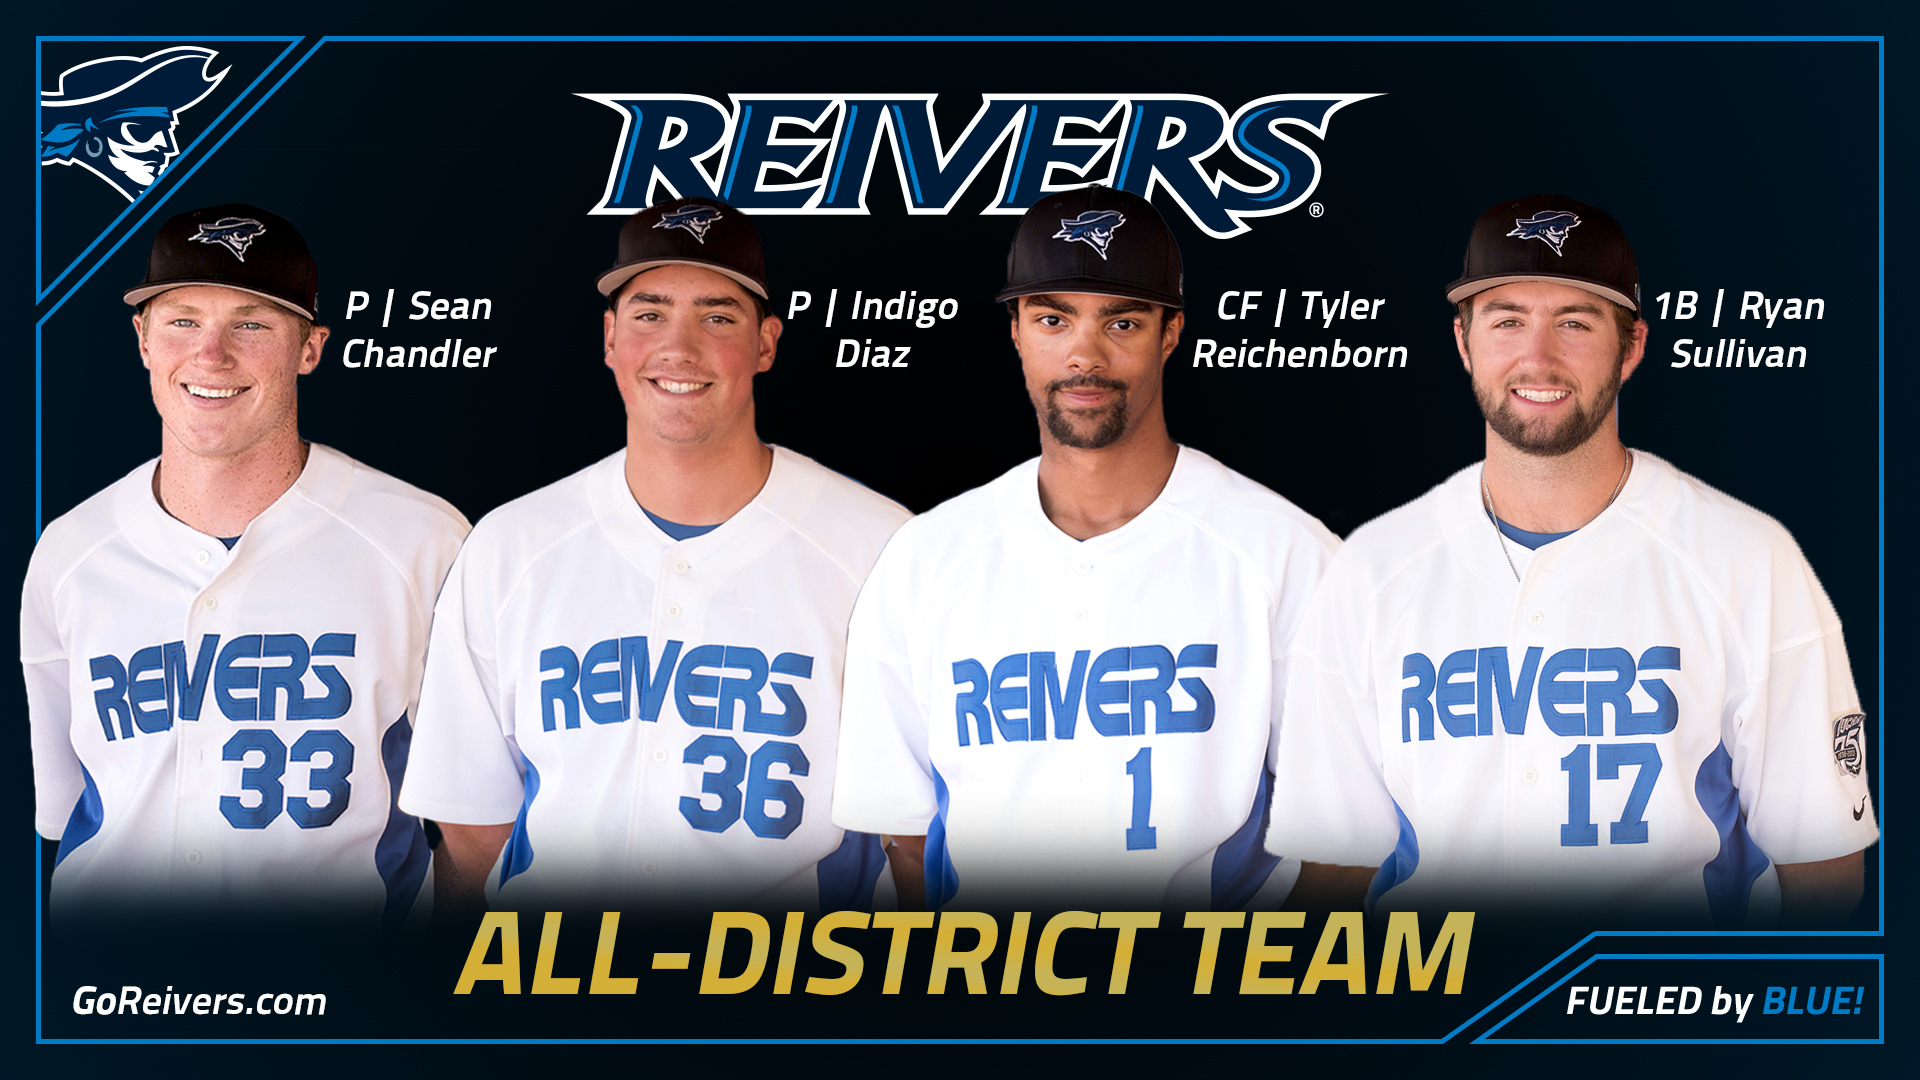 Reivers' postseason run continues, 4 named to All-Northern District Team